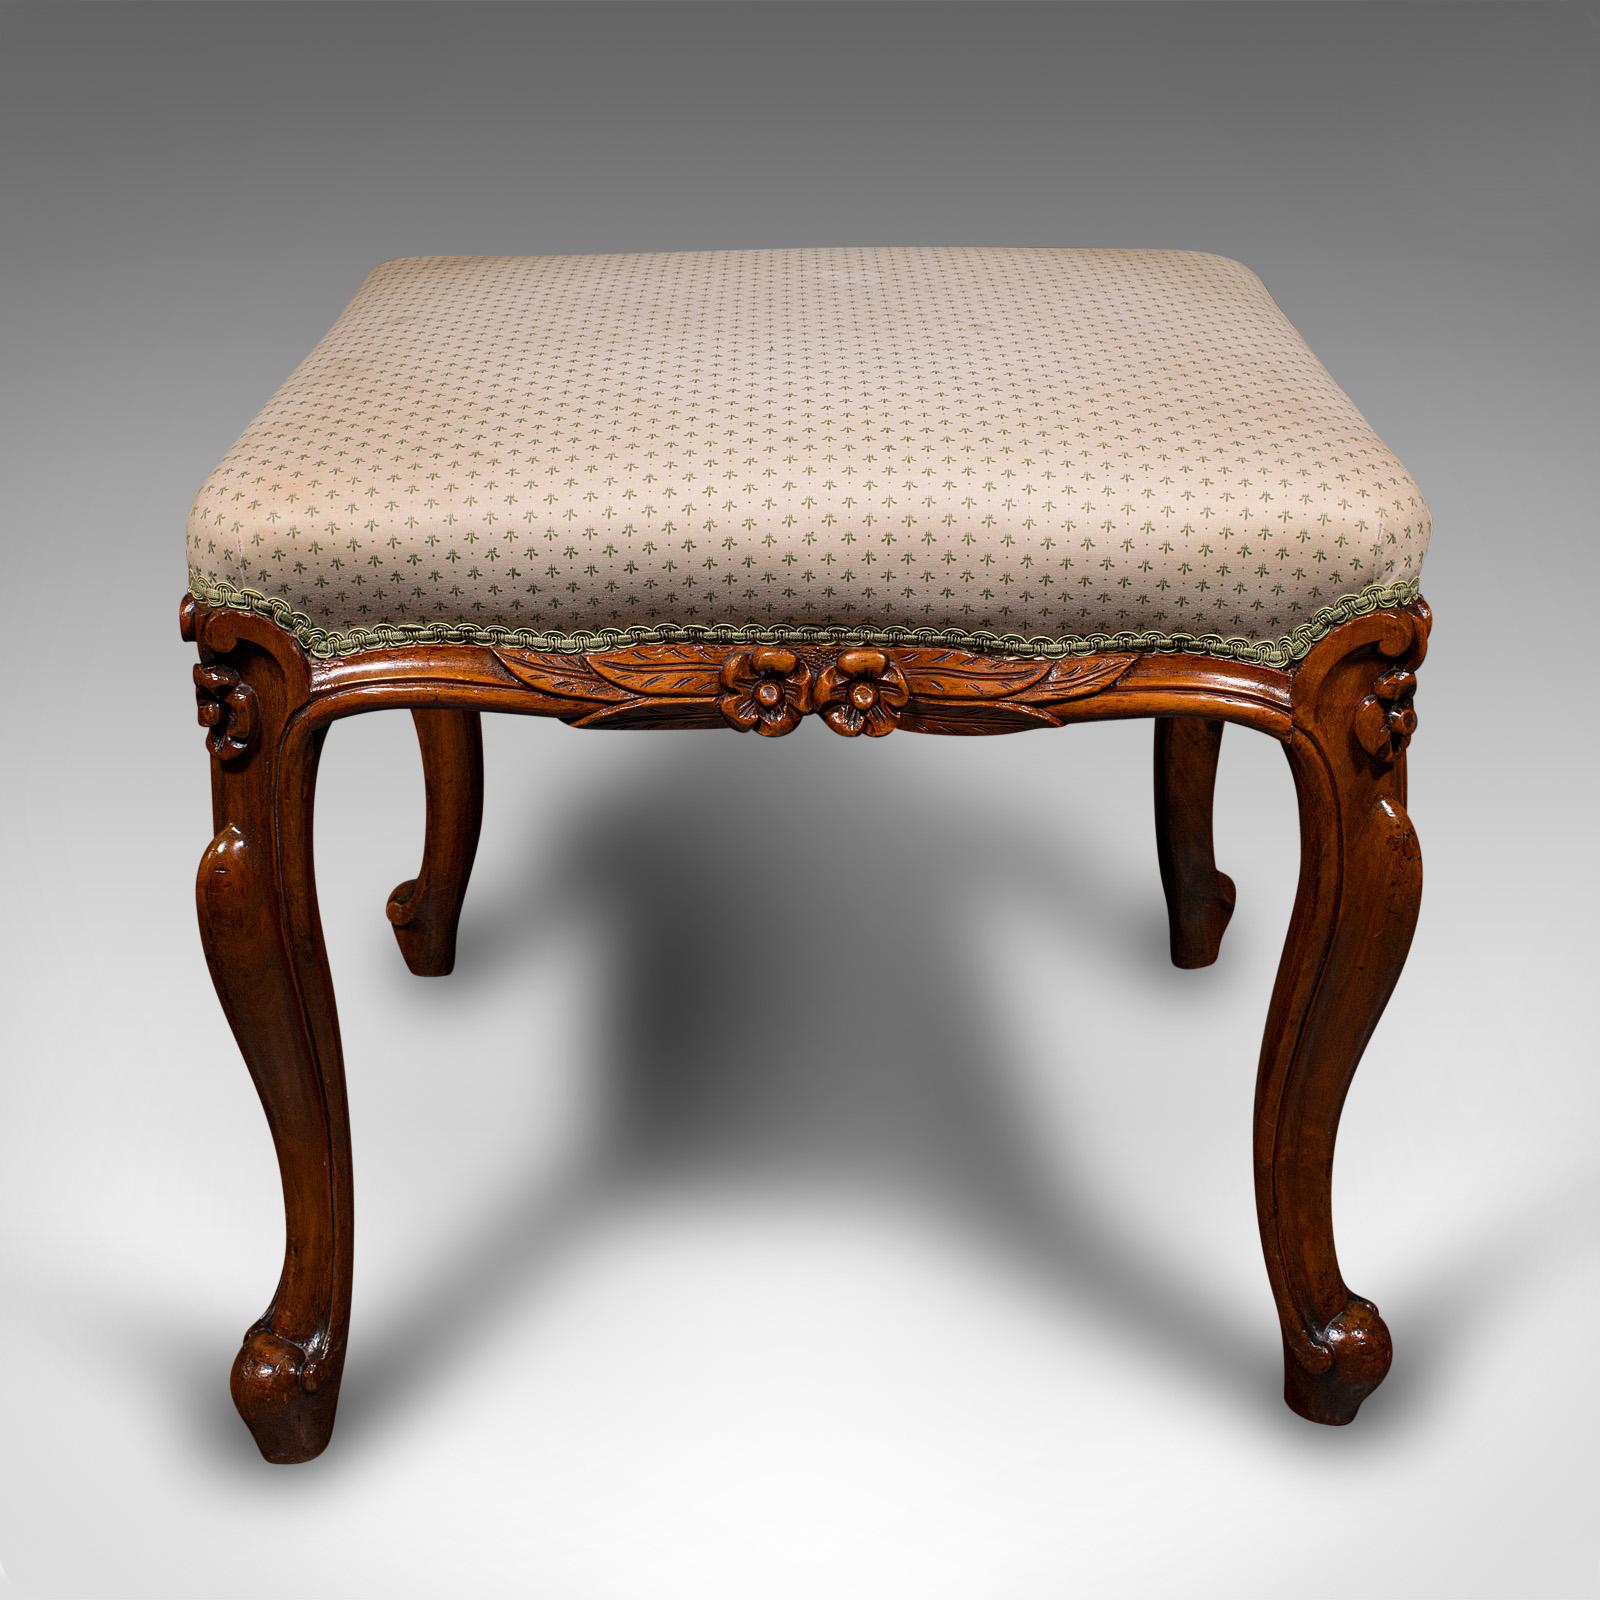 Wide Antique Dressing Stool, English, Walnut Bedroom Seat, Early Victorian, 1840 In Good Condition For Sale In Hele, Devon, GB